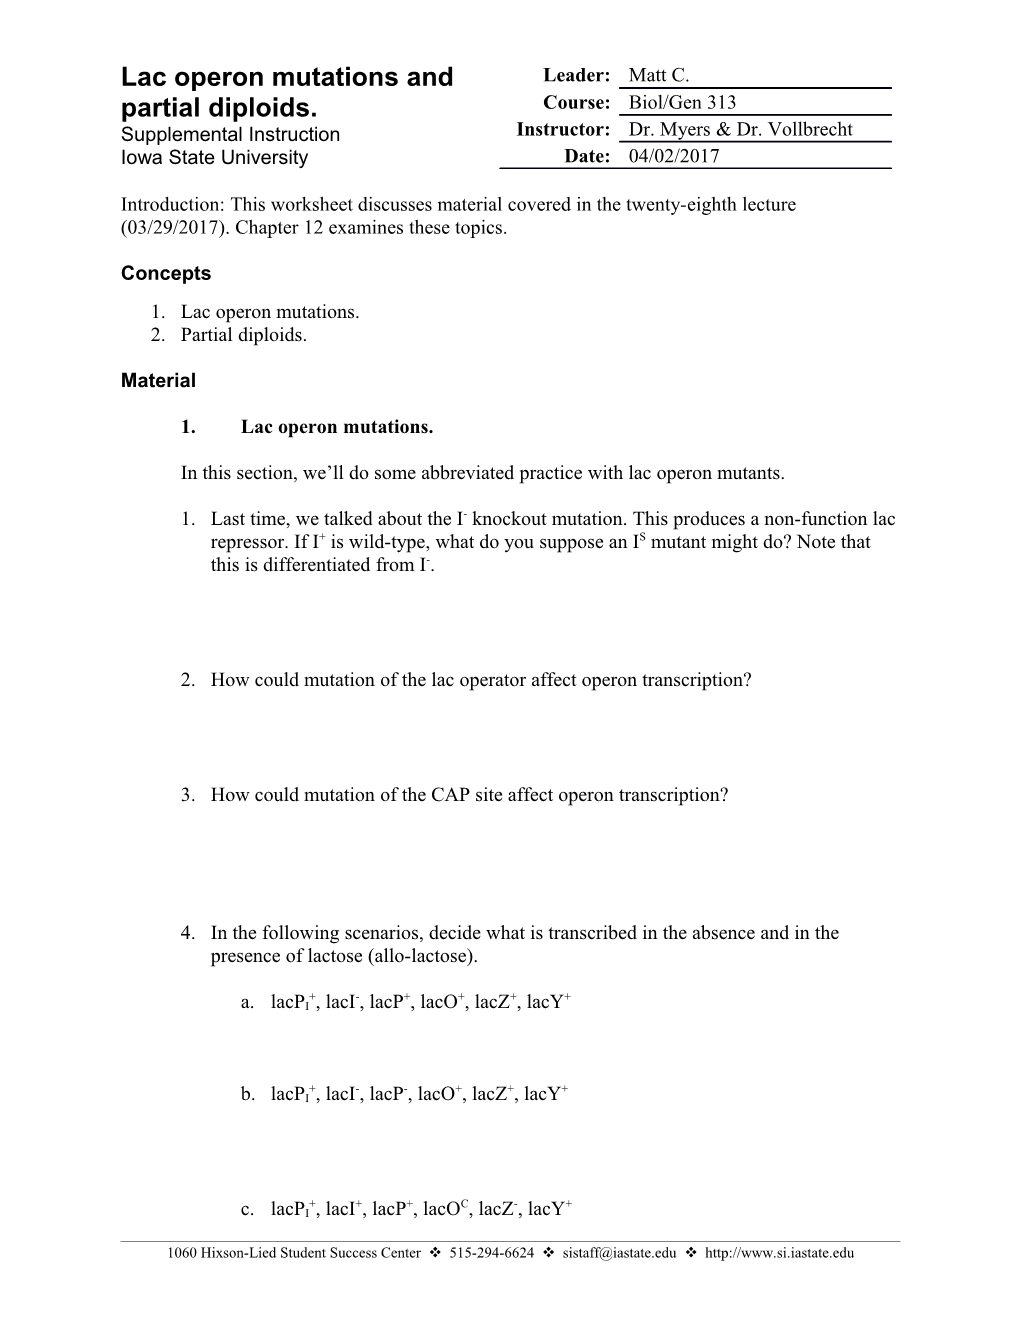 Introduction: This Worksheet Discusses Material Covered in the Twenty-Eighth